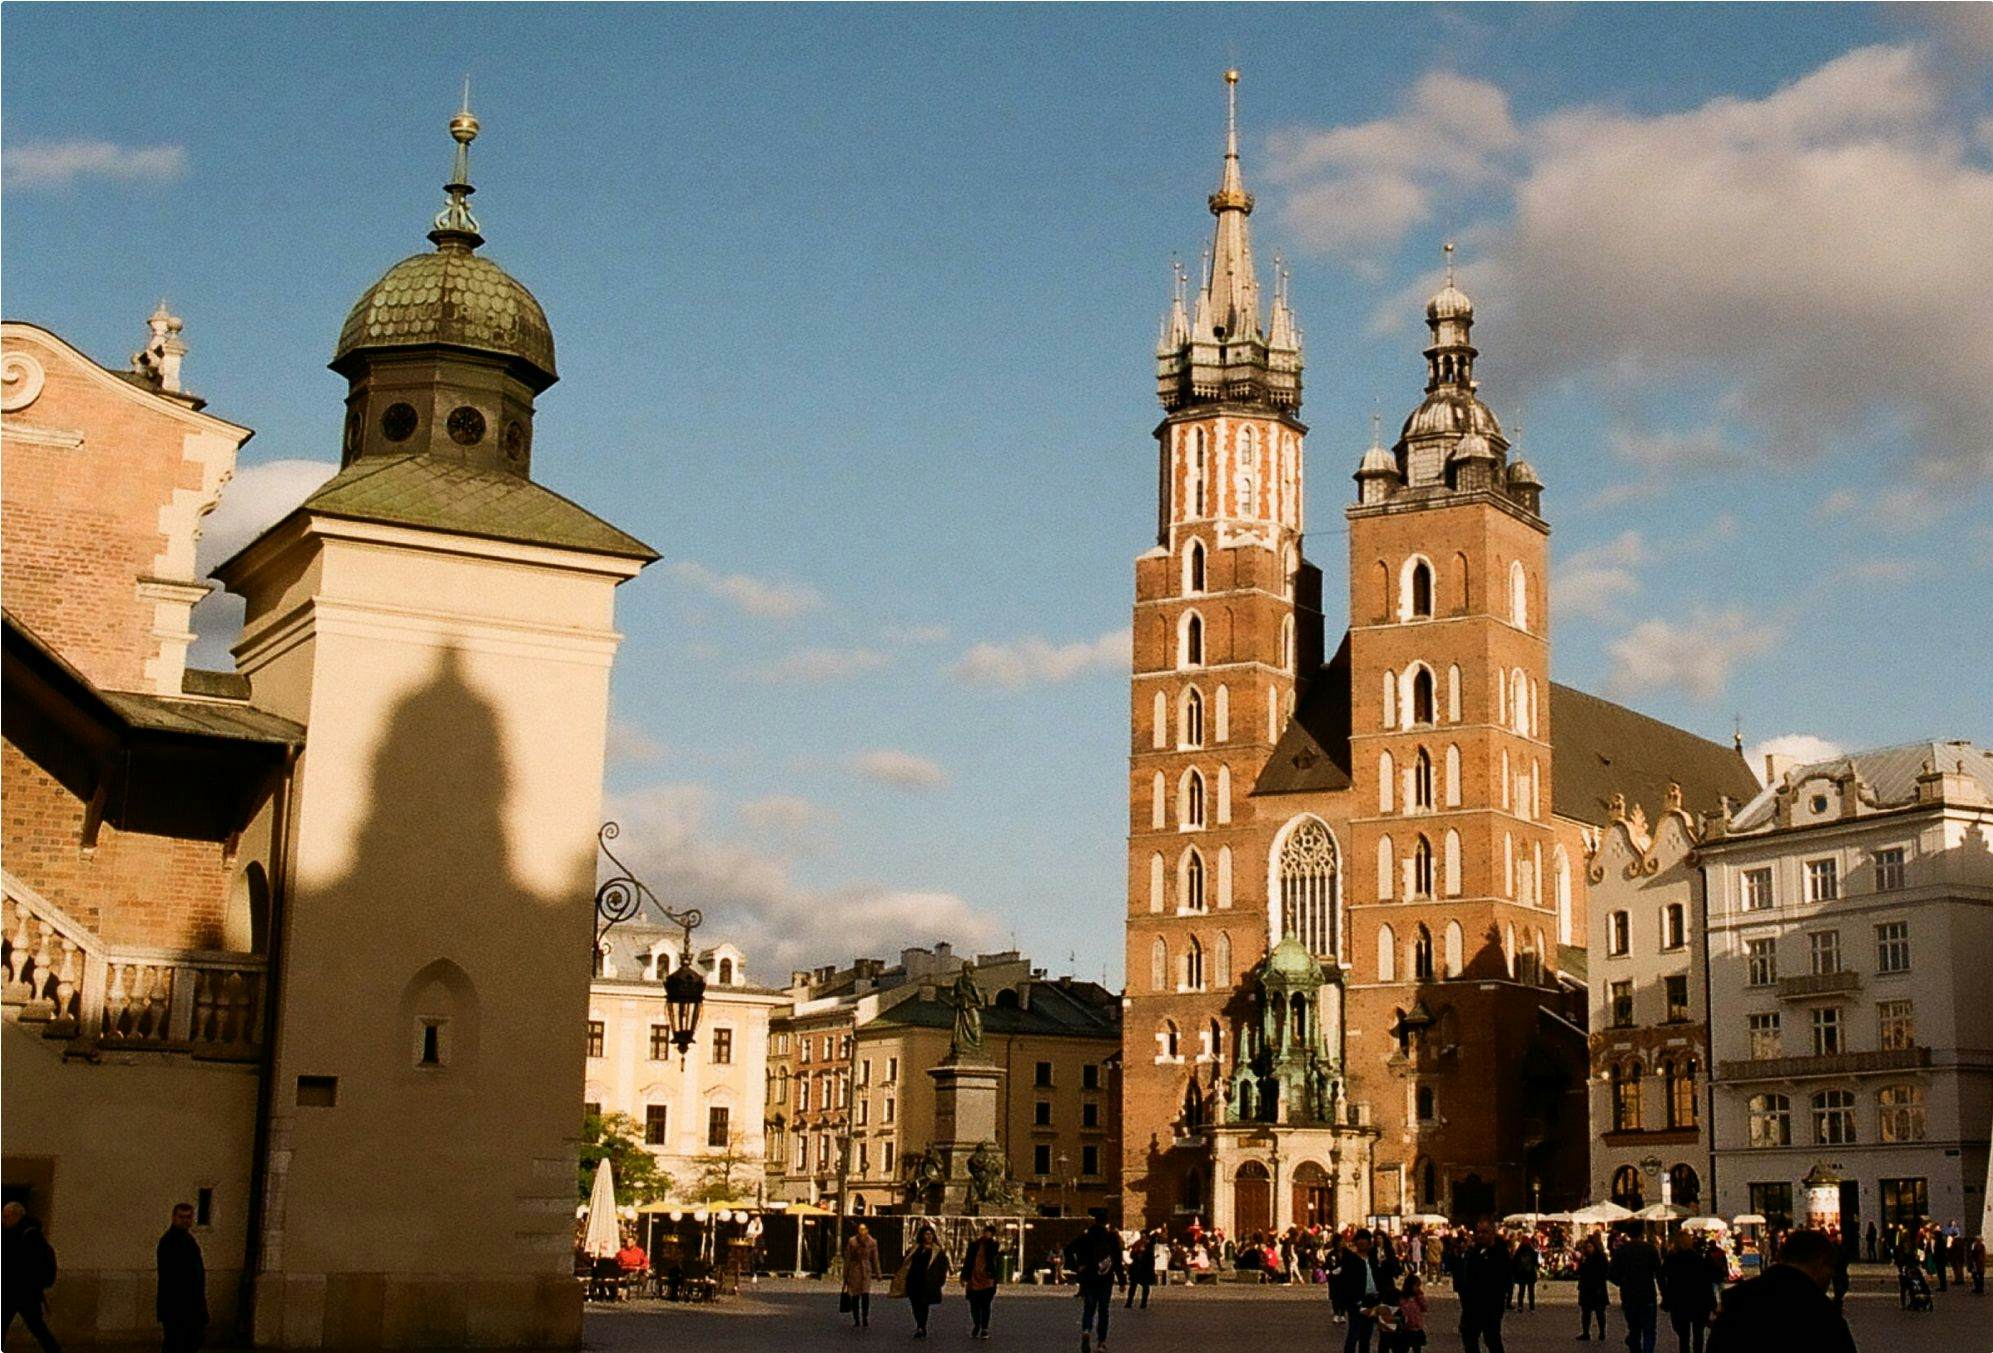 Cracow image